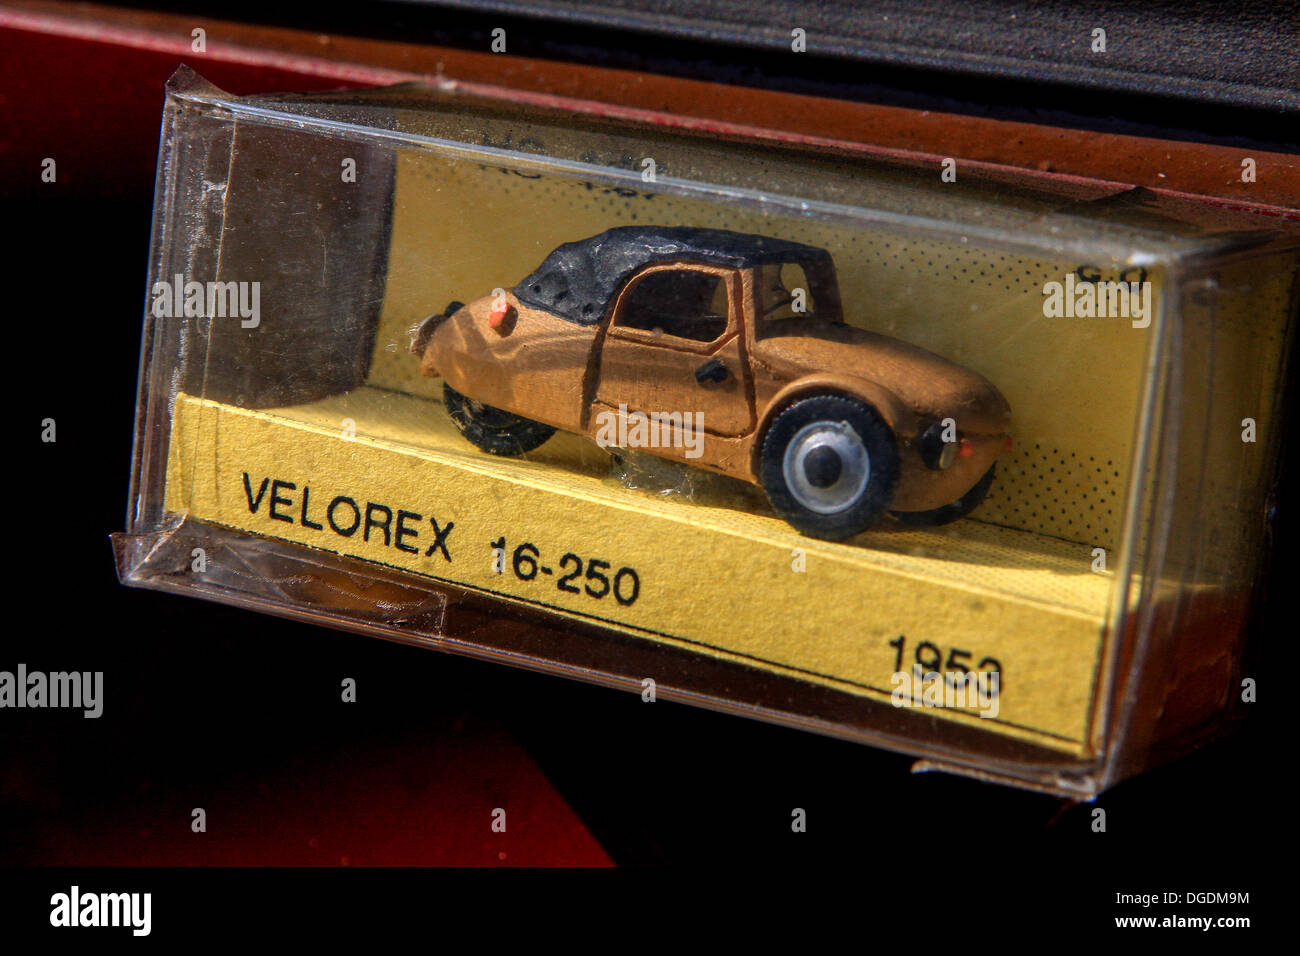 Velorex a small three-wheeled car was manufactured in Czechoslovakia. Designed as a special car for the disabled. Toy model Stock Photo